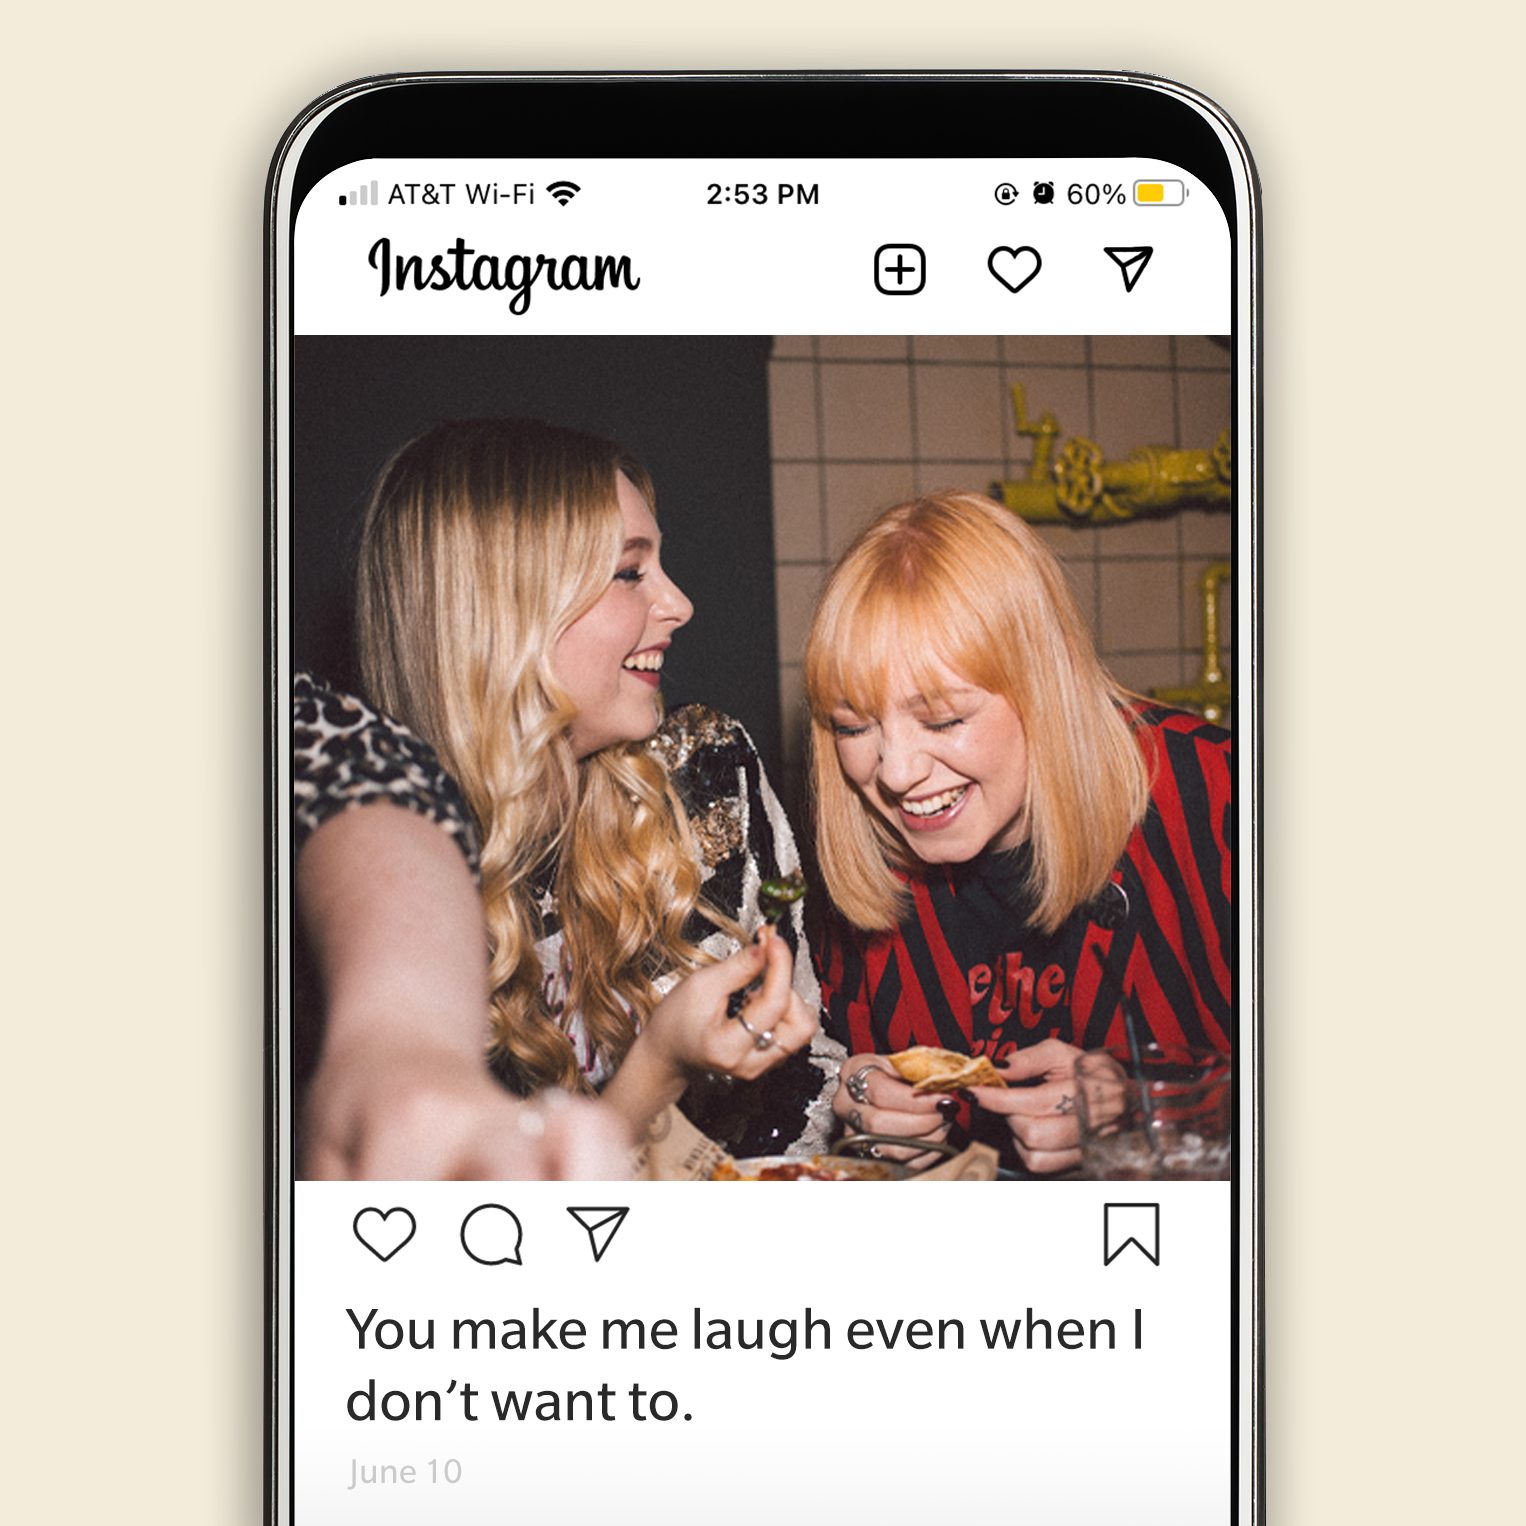 100 Best Friend Captions For Instagram: Cute, Funny, Sentimental